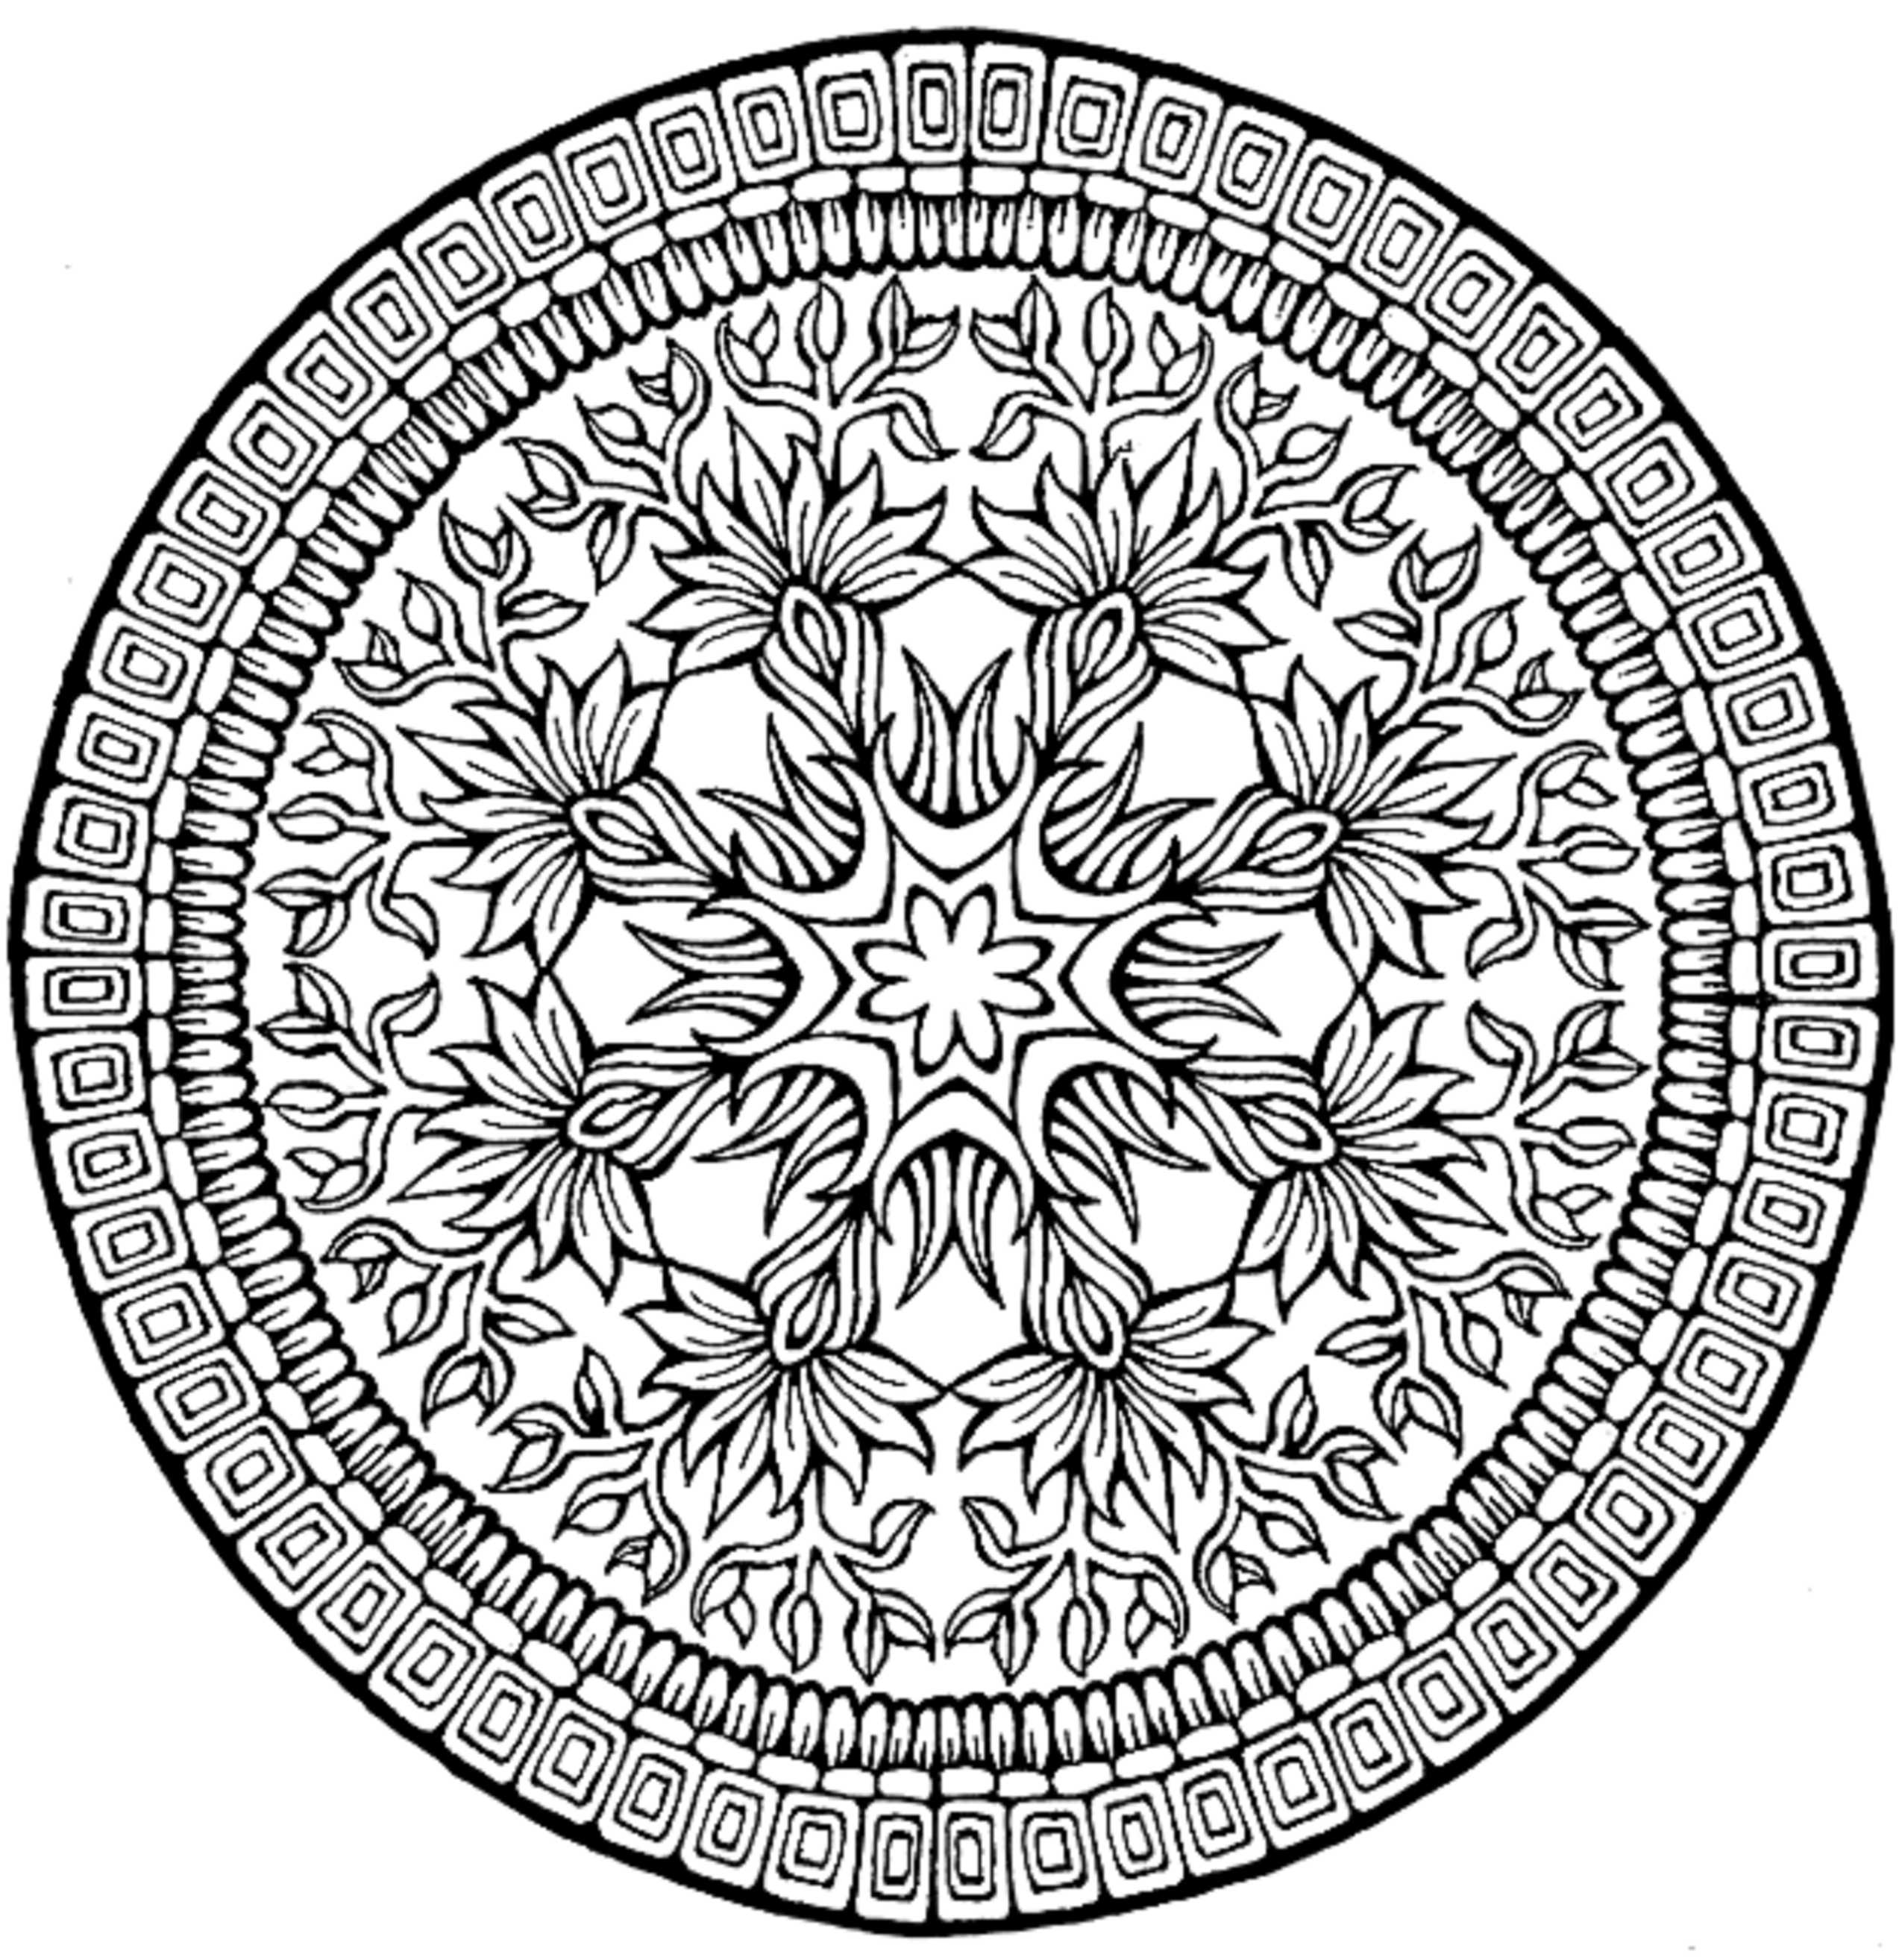 Print & Download - Complex Coloring Pages for Kids and Adults